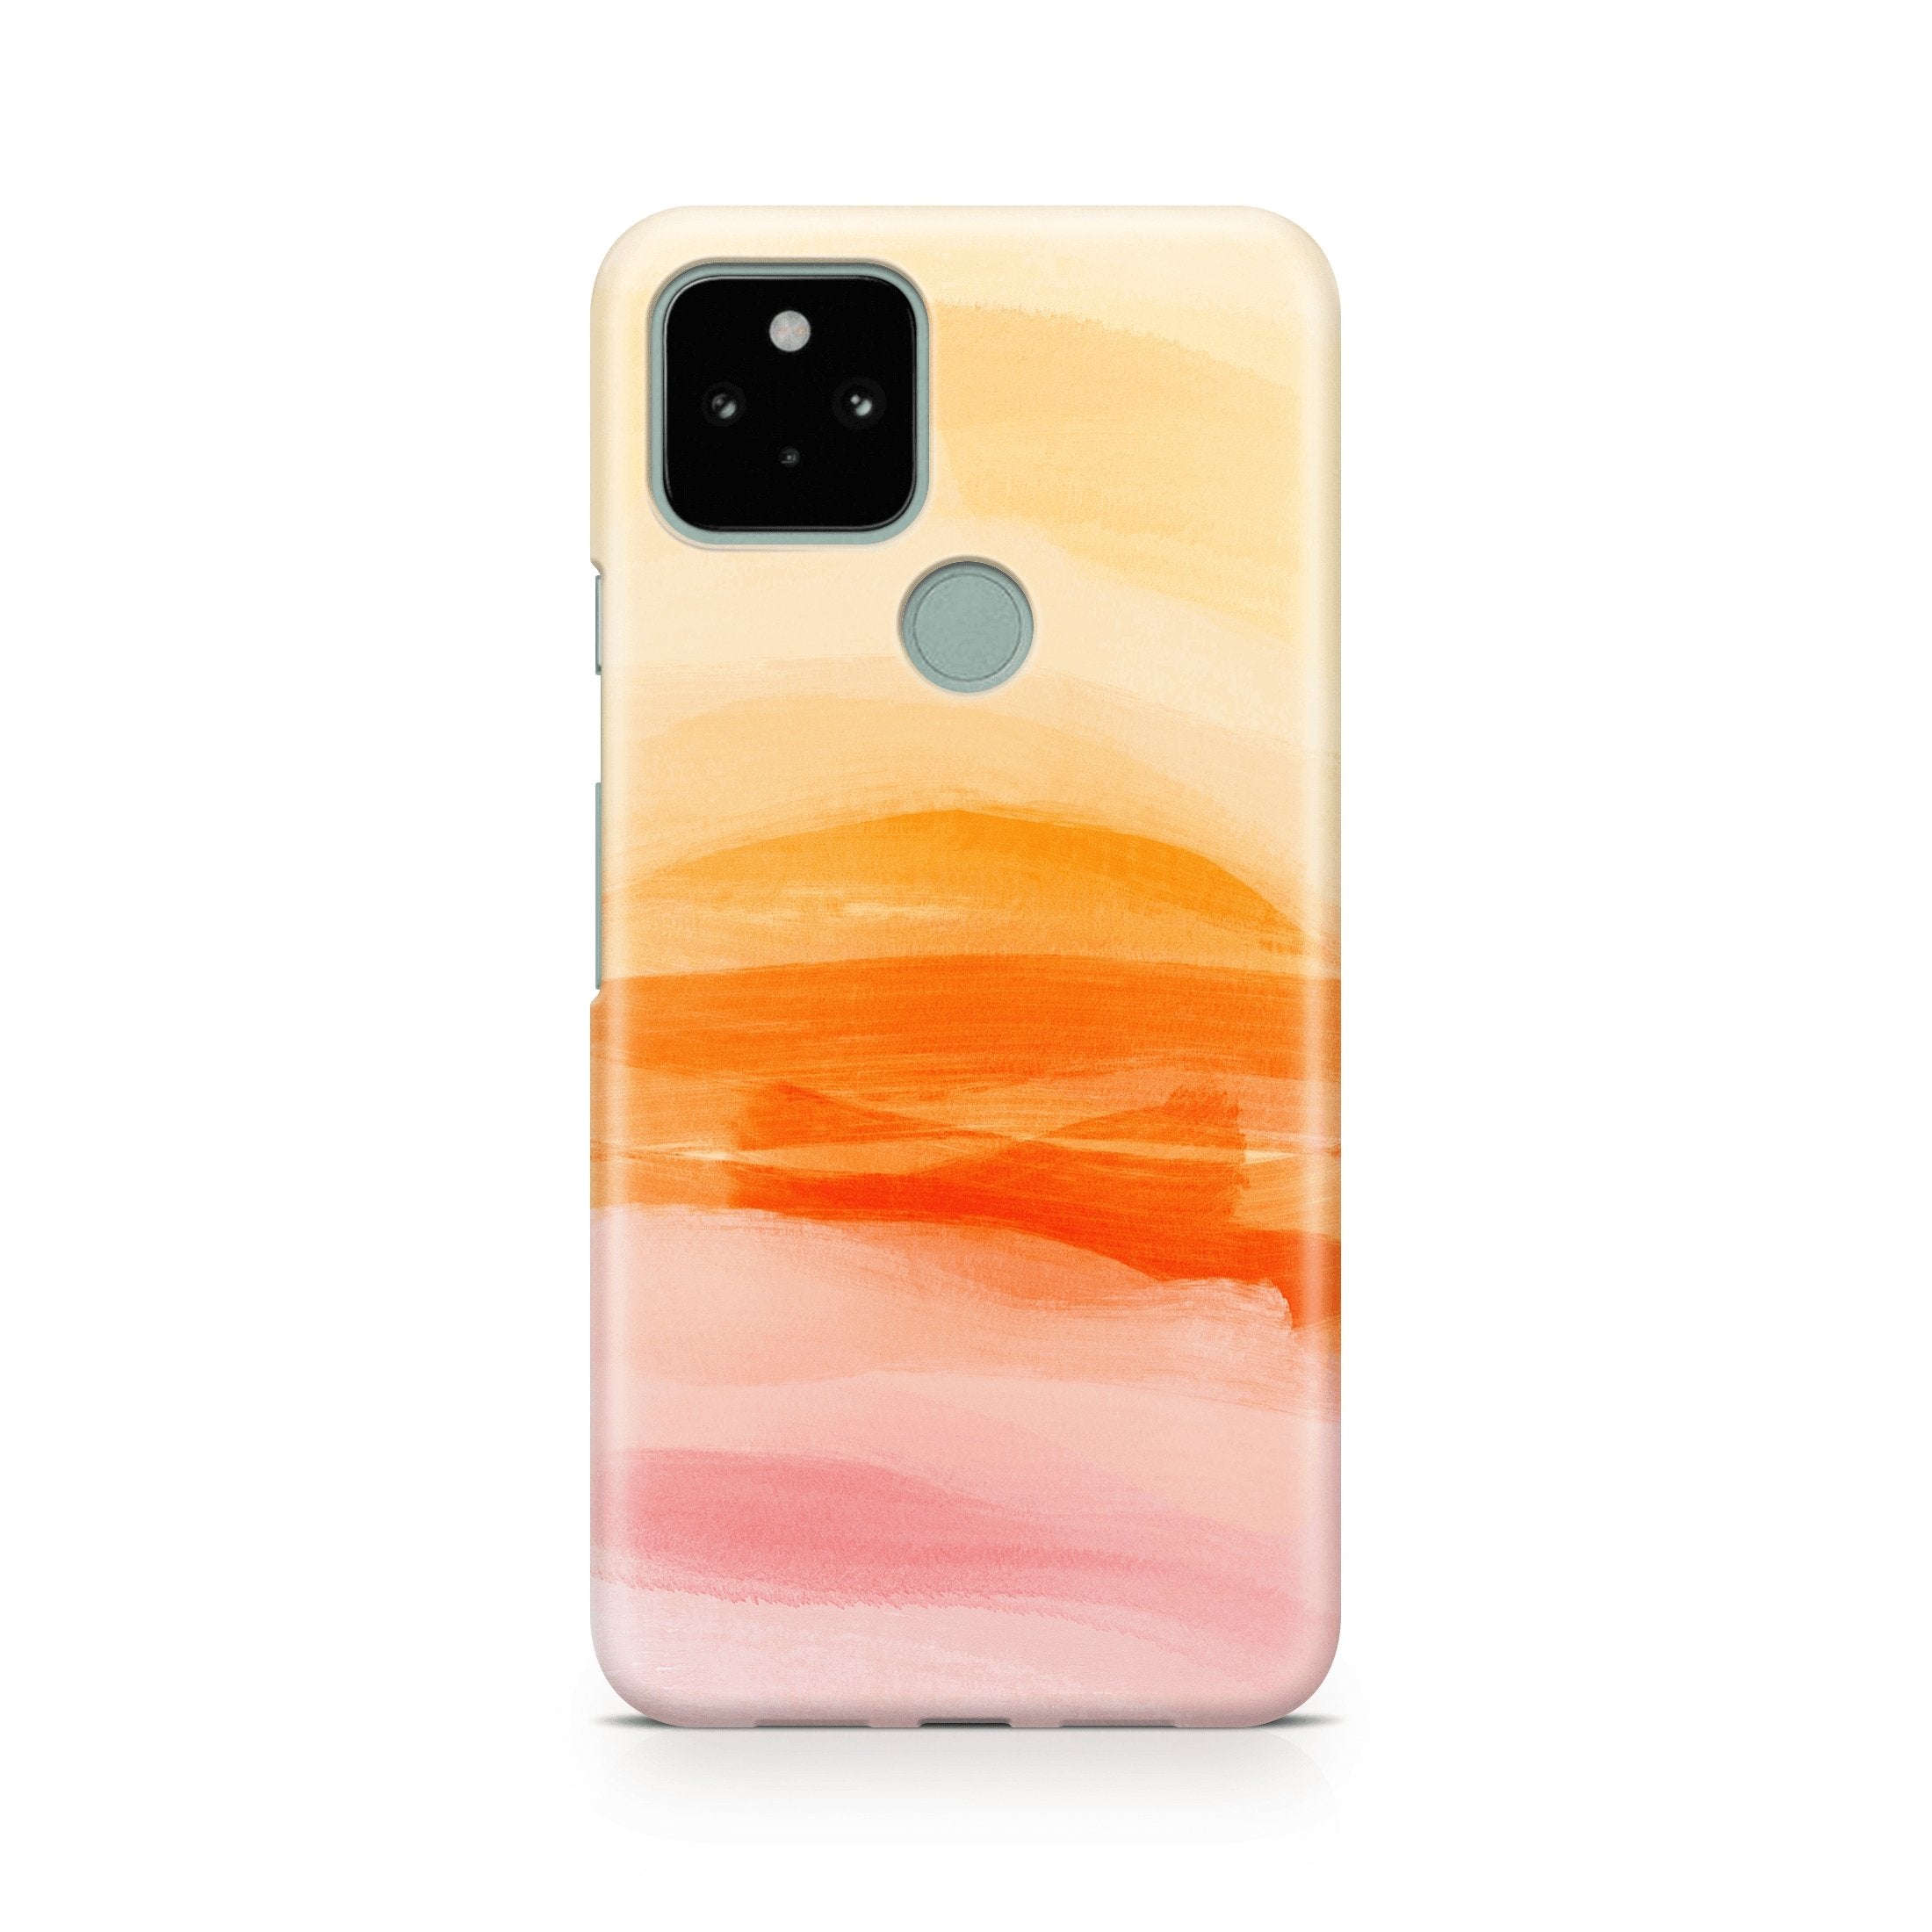 Blazing Orange Ombre - Google phone case designs by CaseSwagger